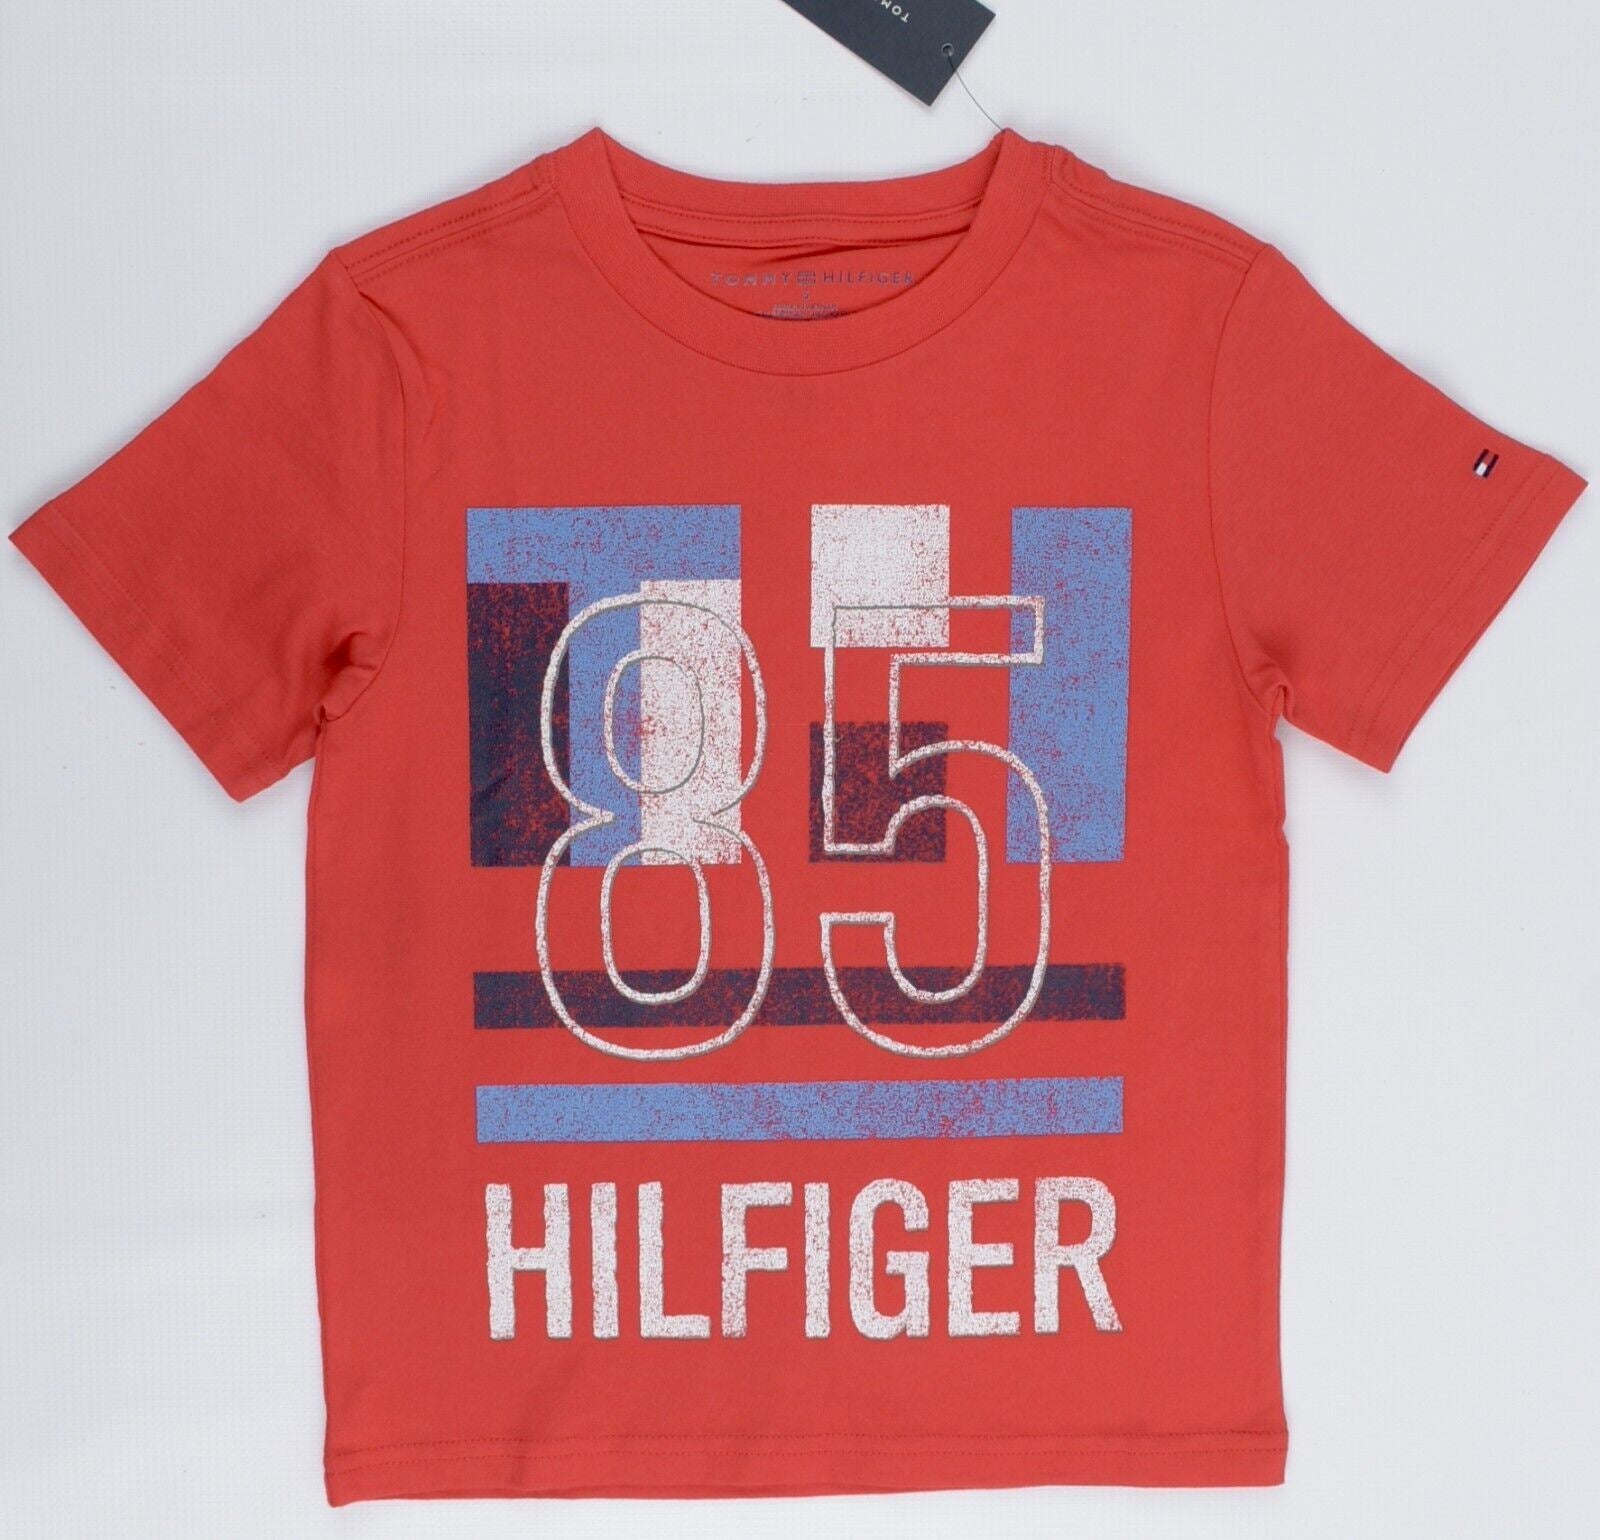 TOMMY HILFIGER Boys' Kids' Crew Neck Printed T-shirt, Chinese Red, size 5 years